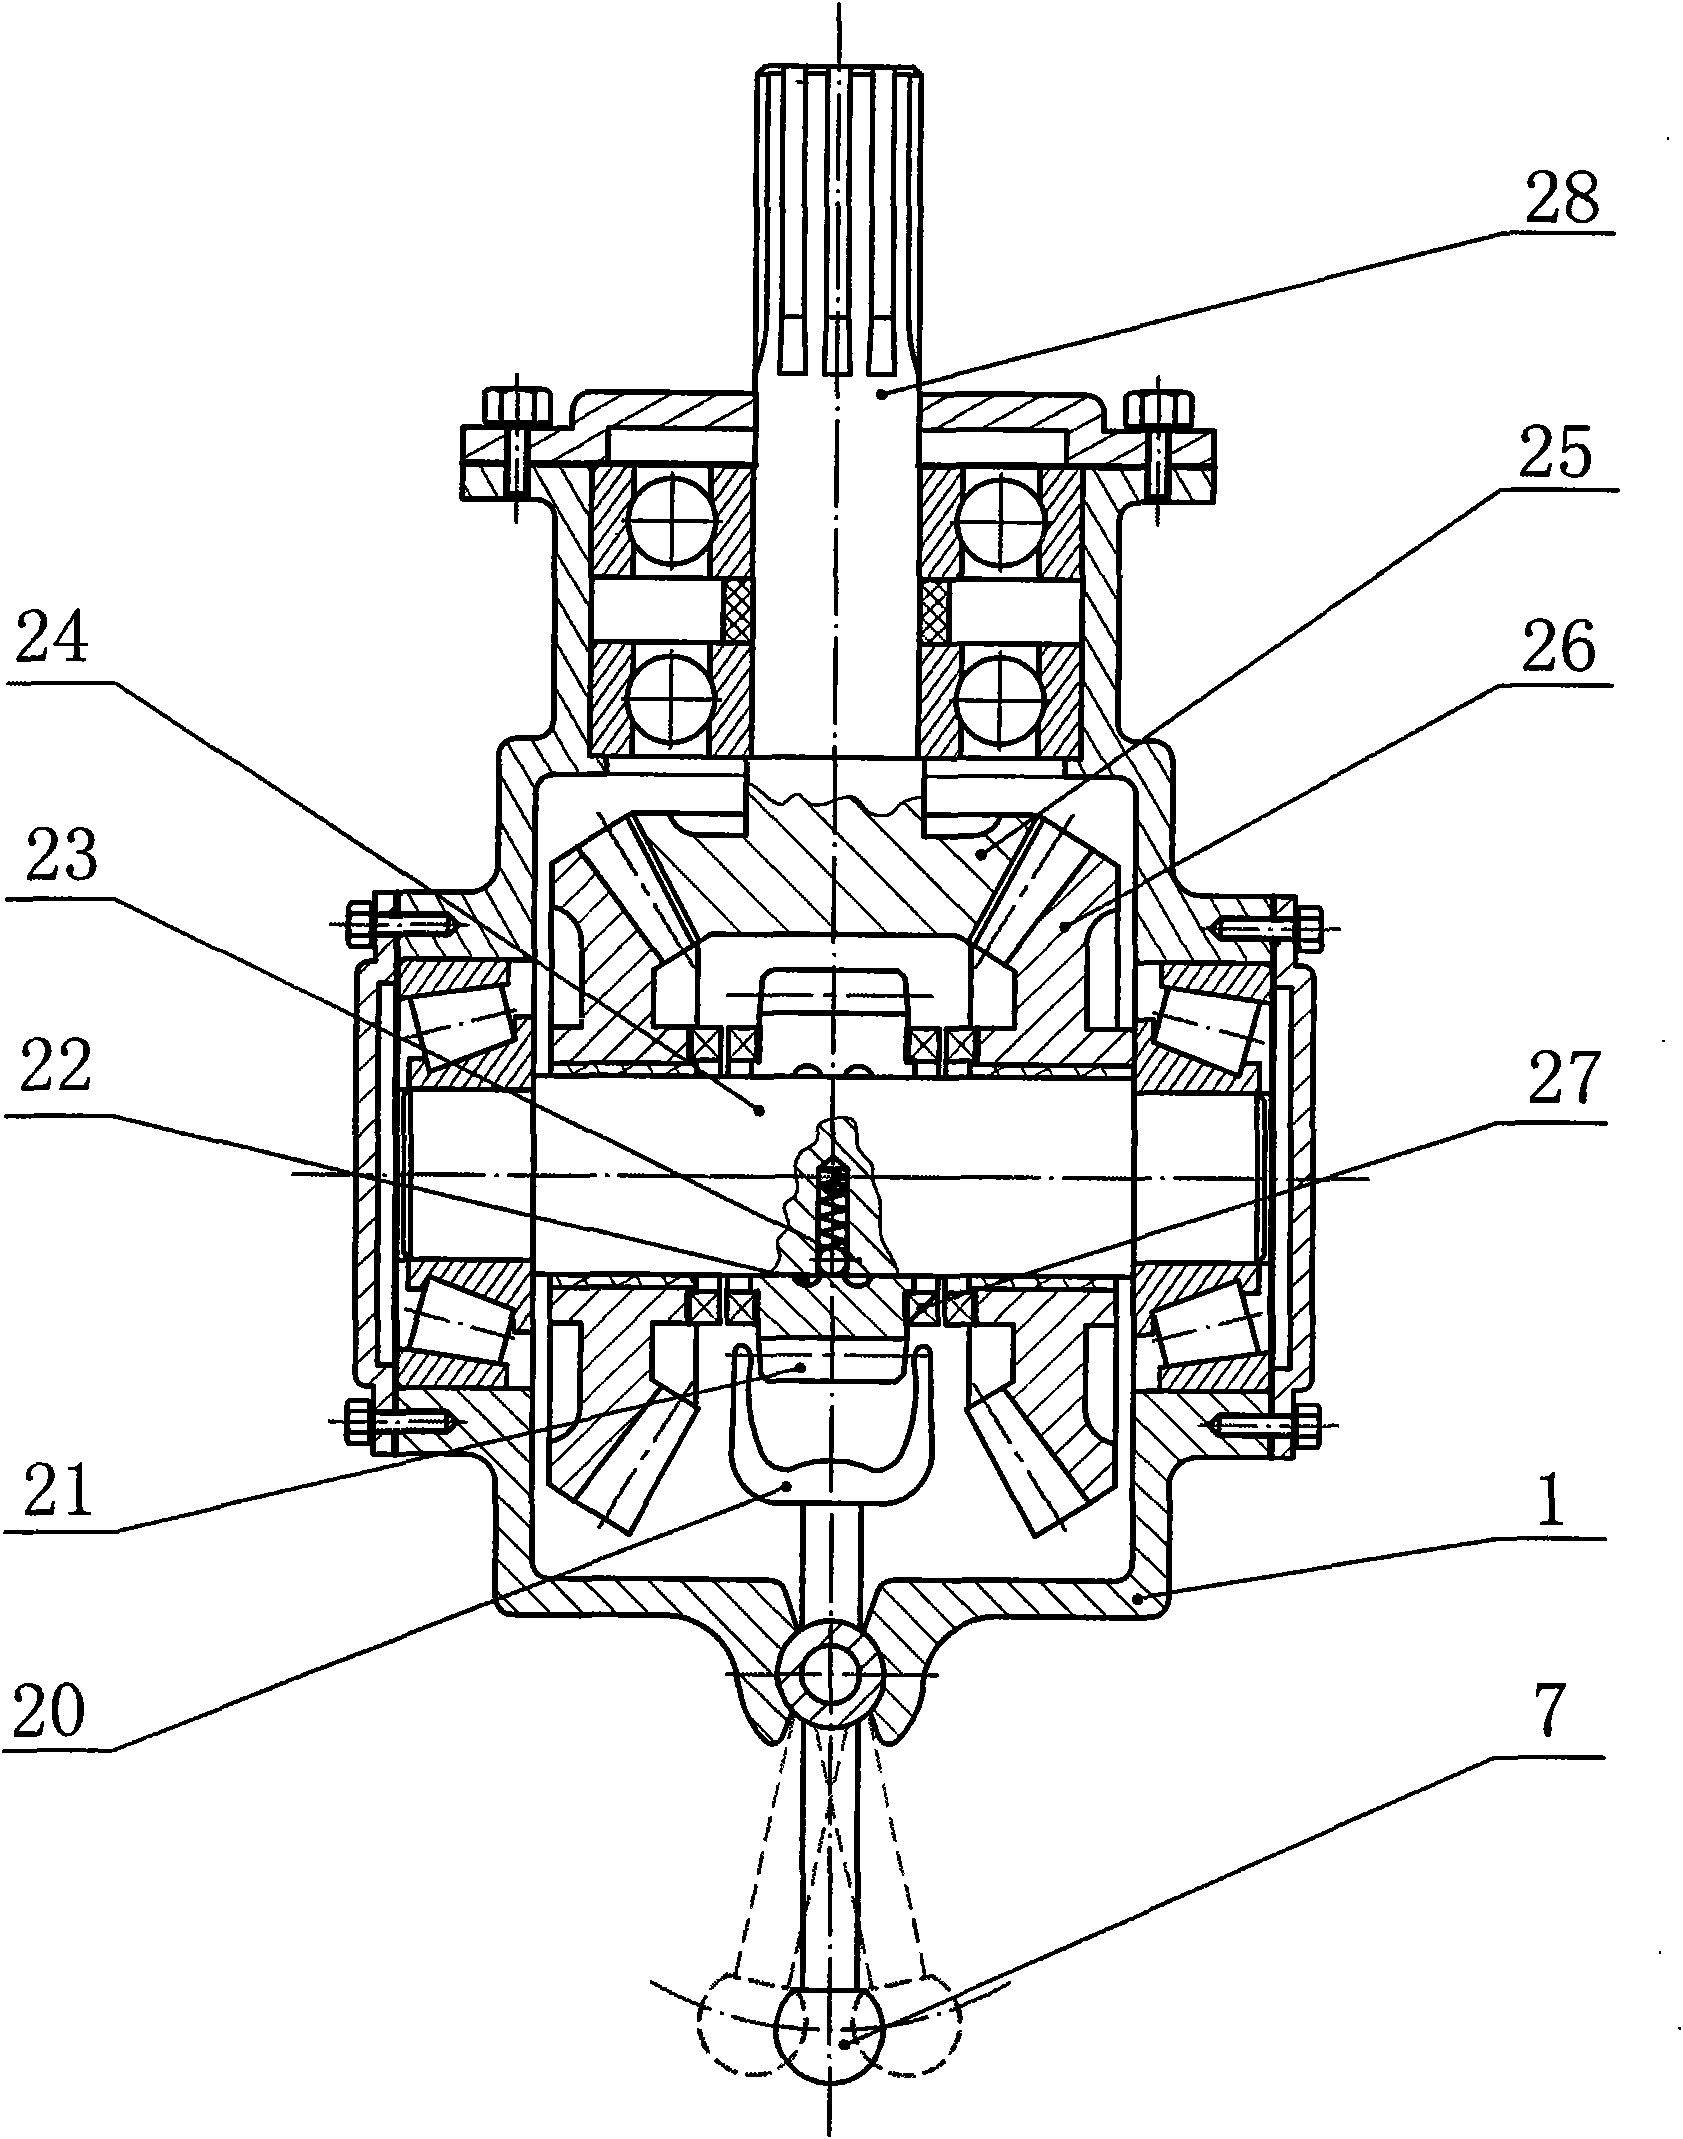 Rotary tillage ditching stubble burying machine capable of rotating positively and reversely